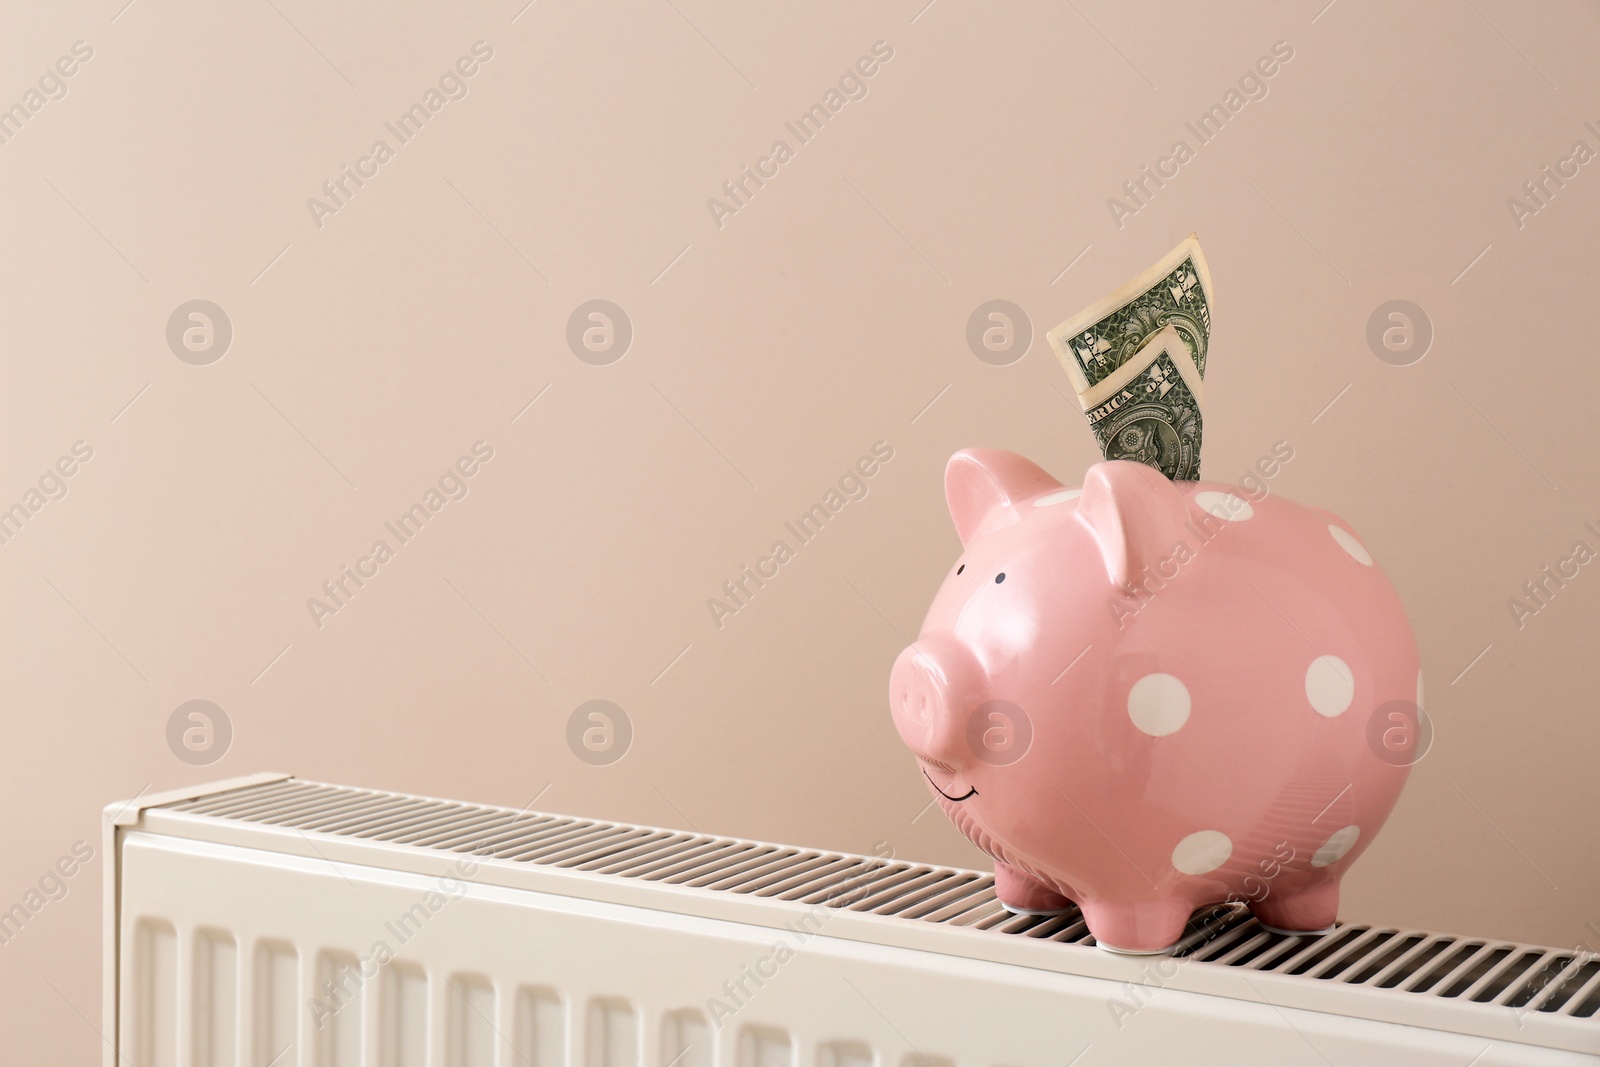 Photo of Heating radiator with piggy bank and money on color background